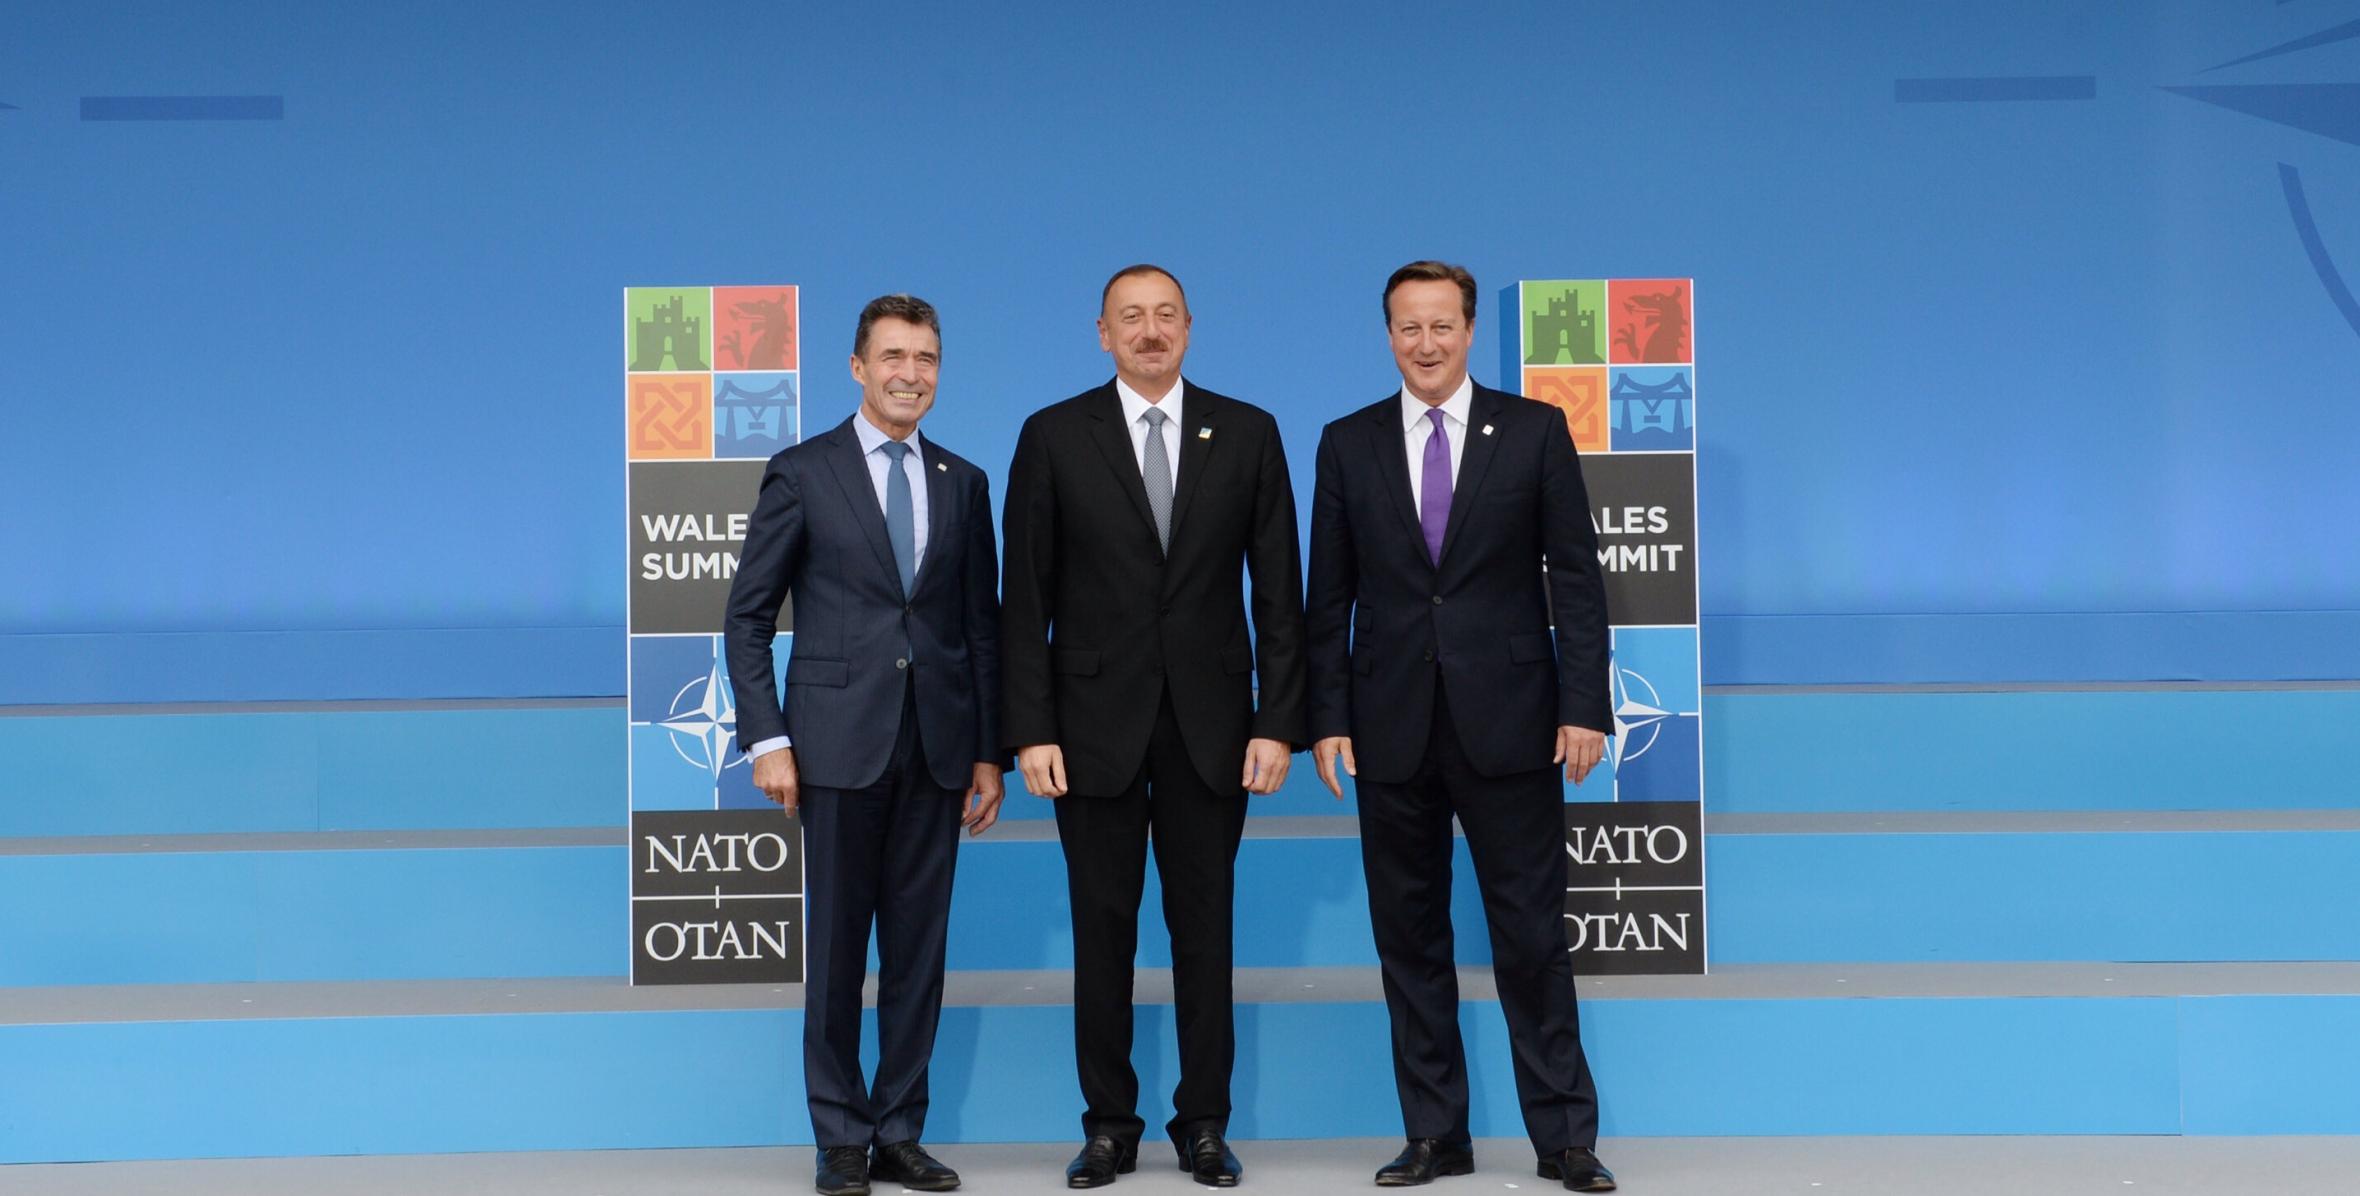 Ilham Aliyev attended NATO summit in Wales